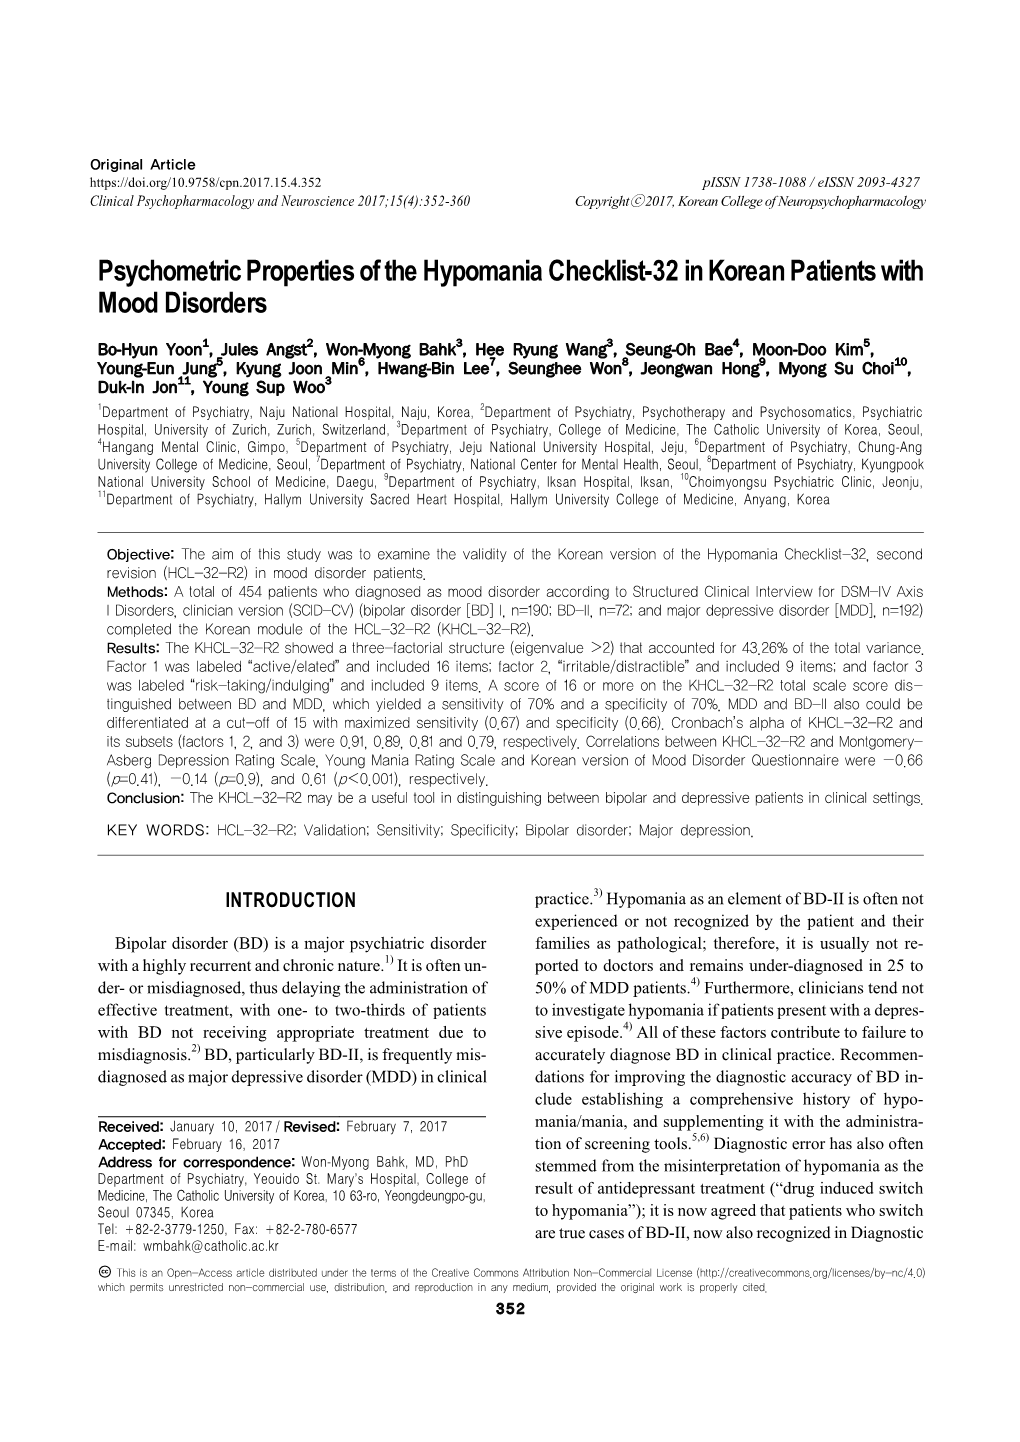 Psychometric Properties of the Hypomania Checklist-32 in Korean Patients with Mood Disorders